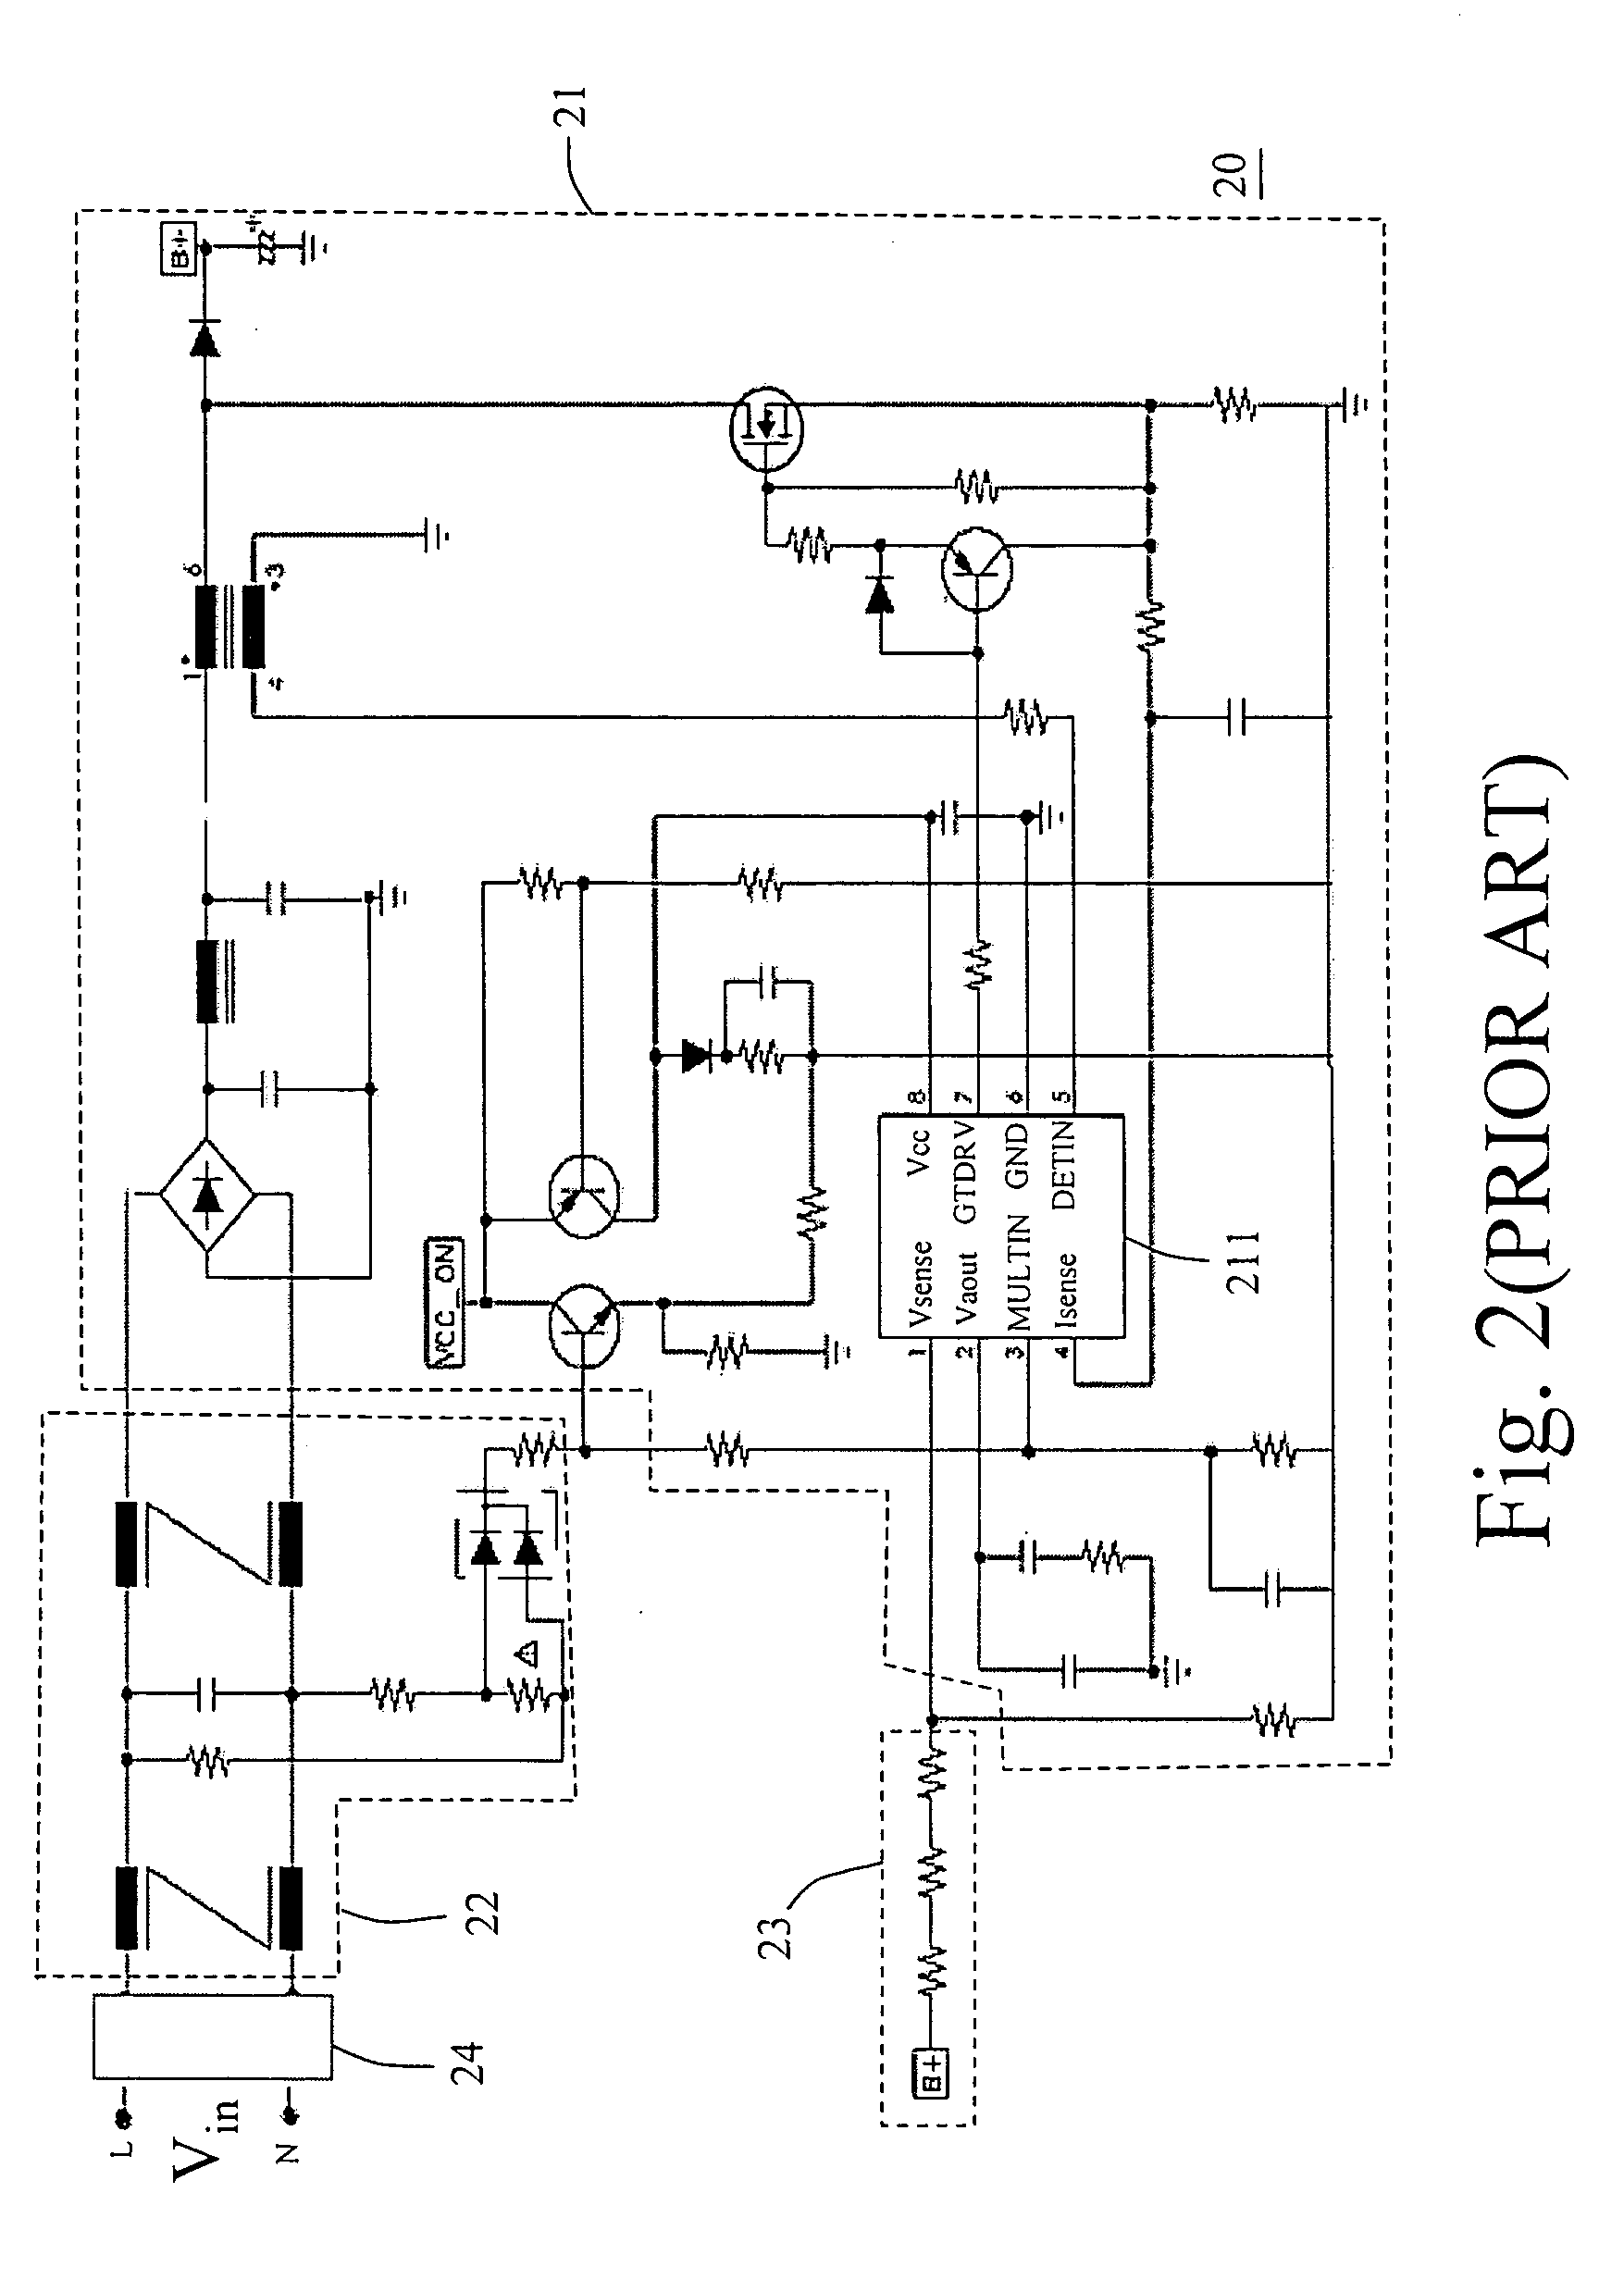 High-voltage detecting circuit for saving power in standby mode